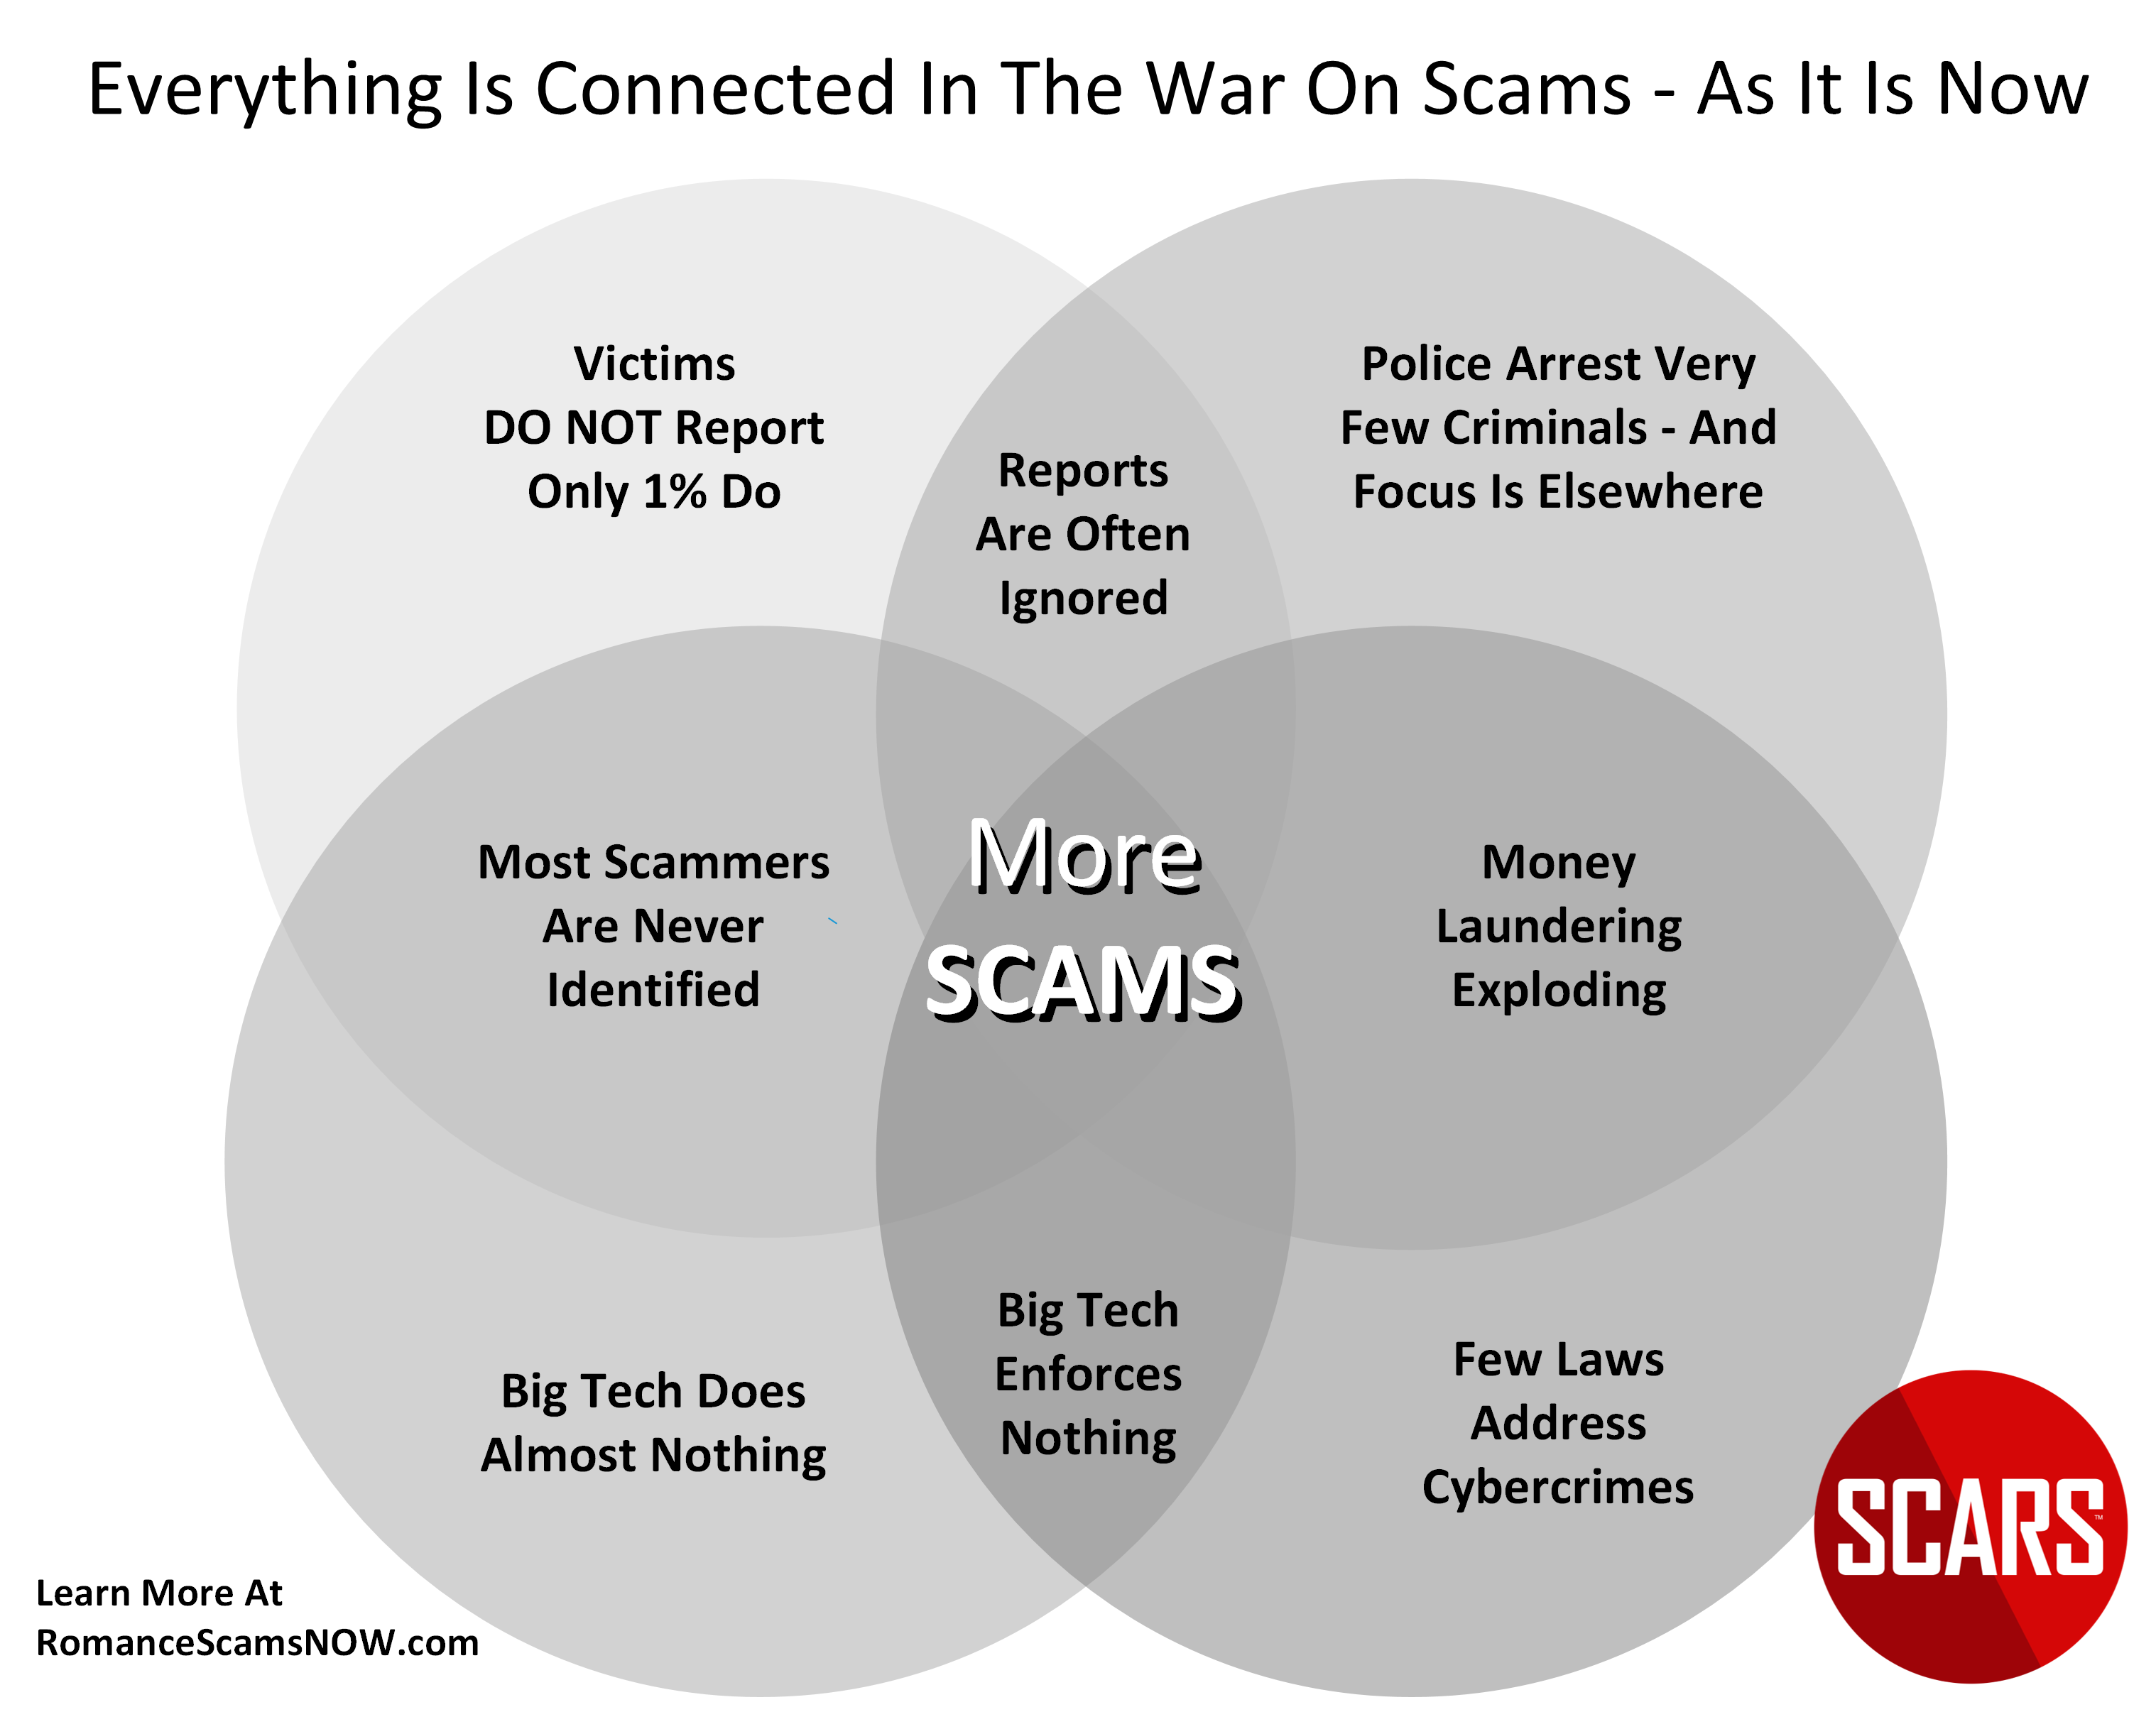 Everything is connected in the war on scams - As It Is Now